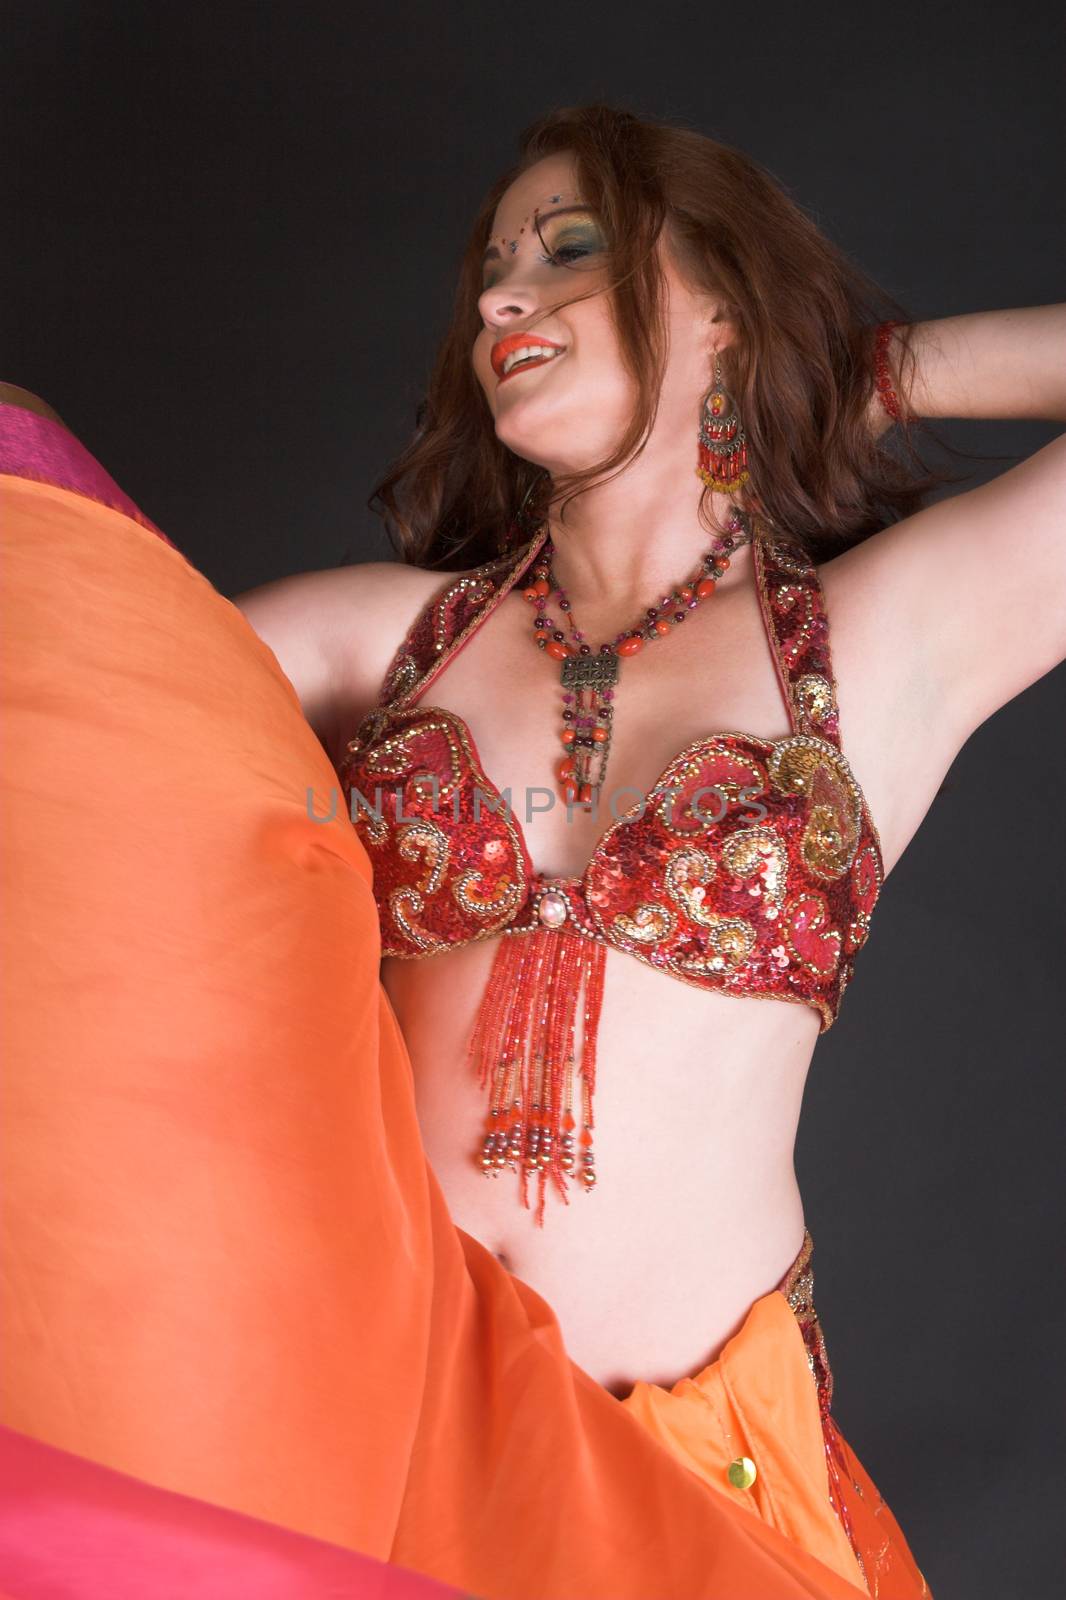 Belly Dancer wearing a red costume with jewelery